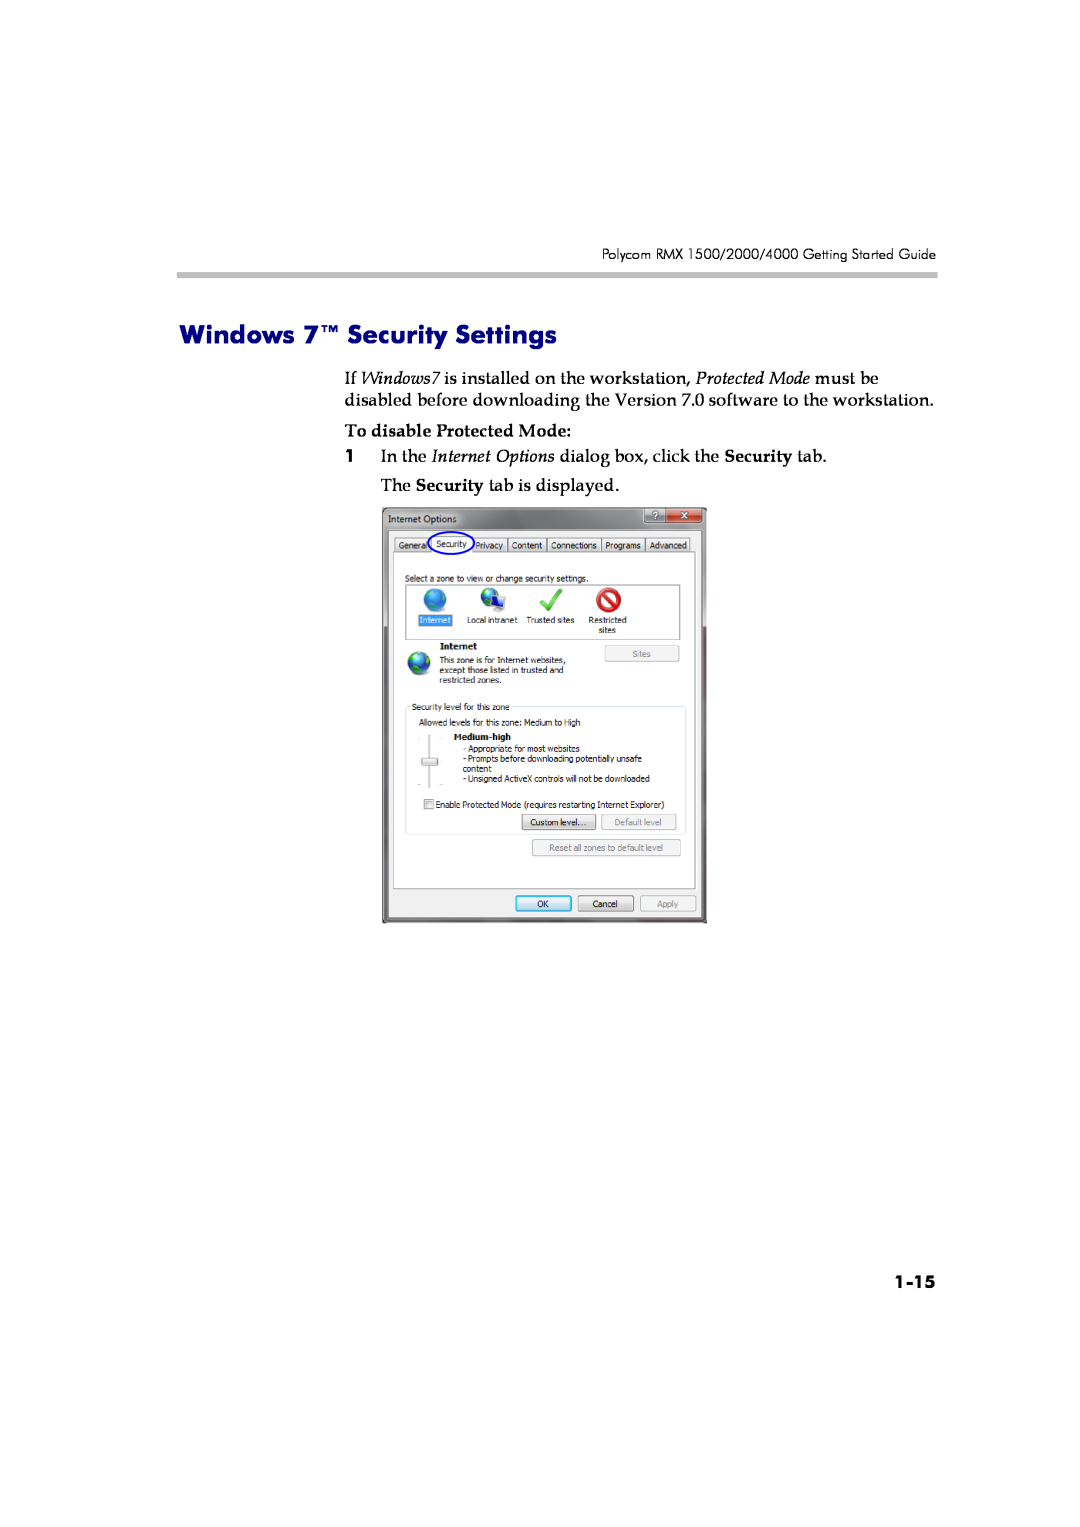 Polycom DOC2560A manual Windows 7 Security Settings, To disable Protected Mode, 1-15 